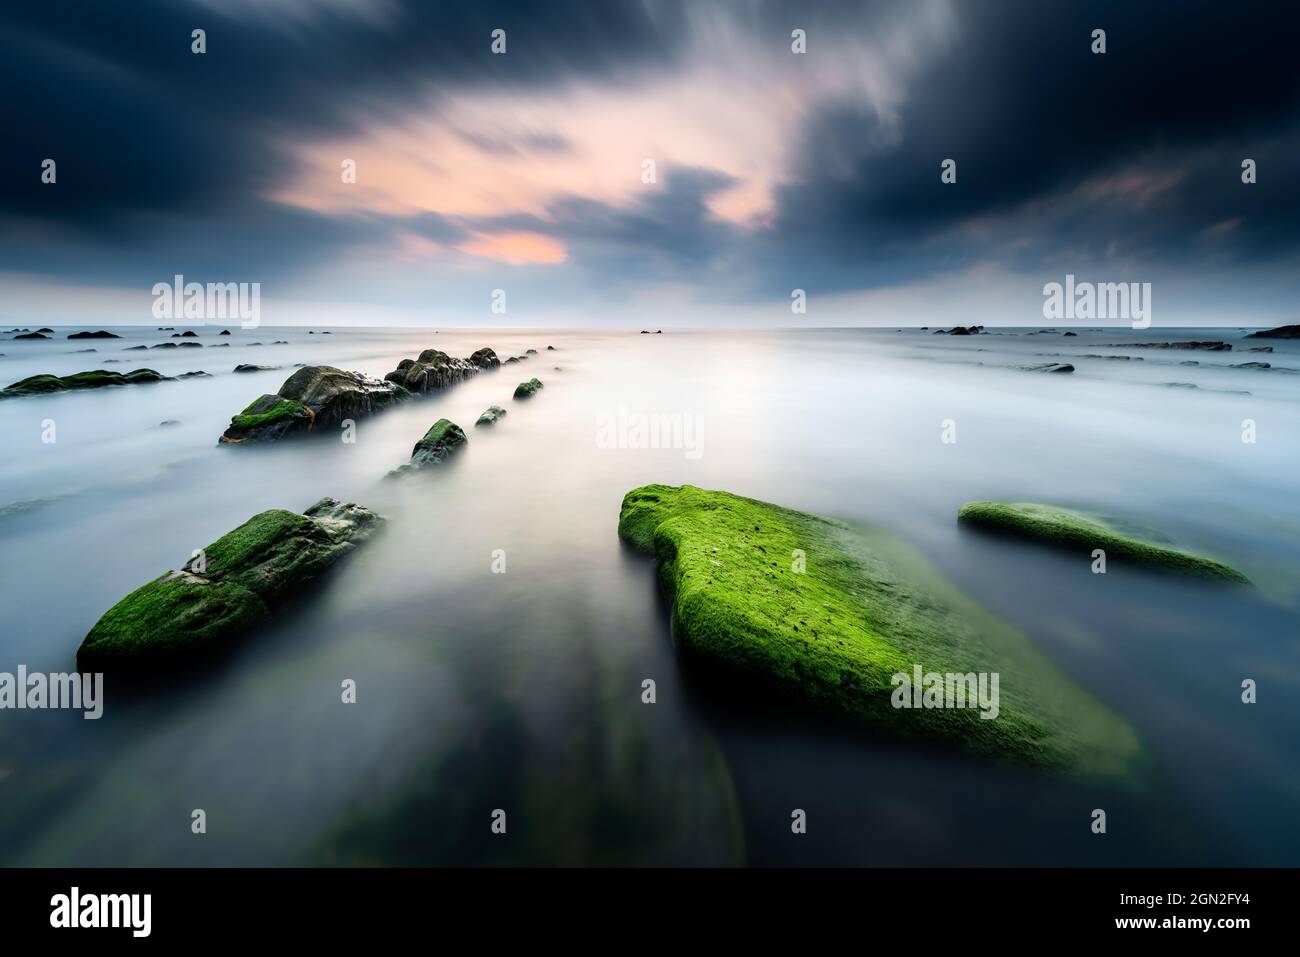 SPAIN, BASQUE COUNTRY, BISCAY, BARRIKA. CUT OUT ROCKS COVERED WITH GREEN ALGAE AT SUNSET WITH A STORMY SKY Stock Photo